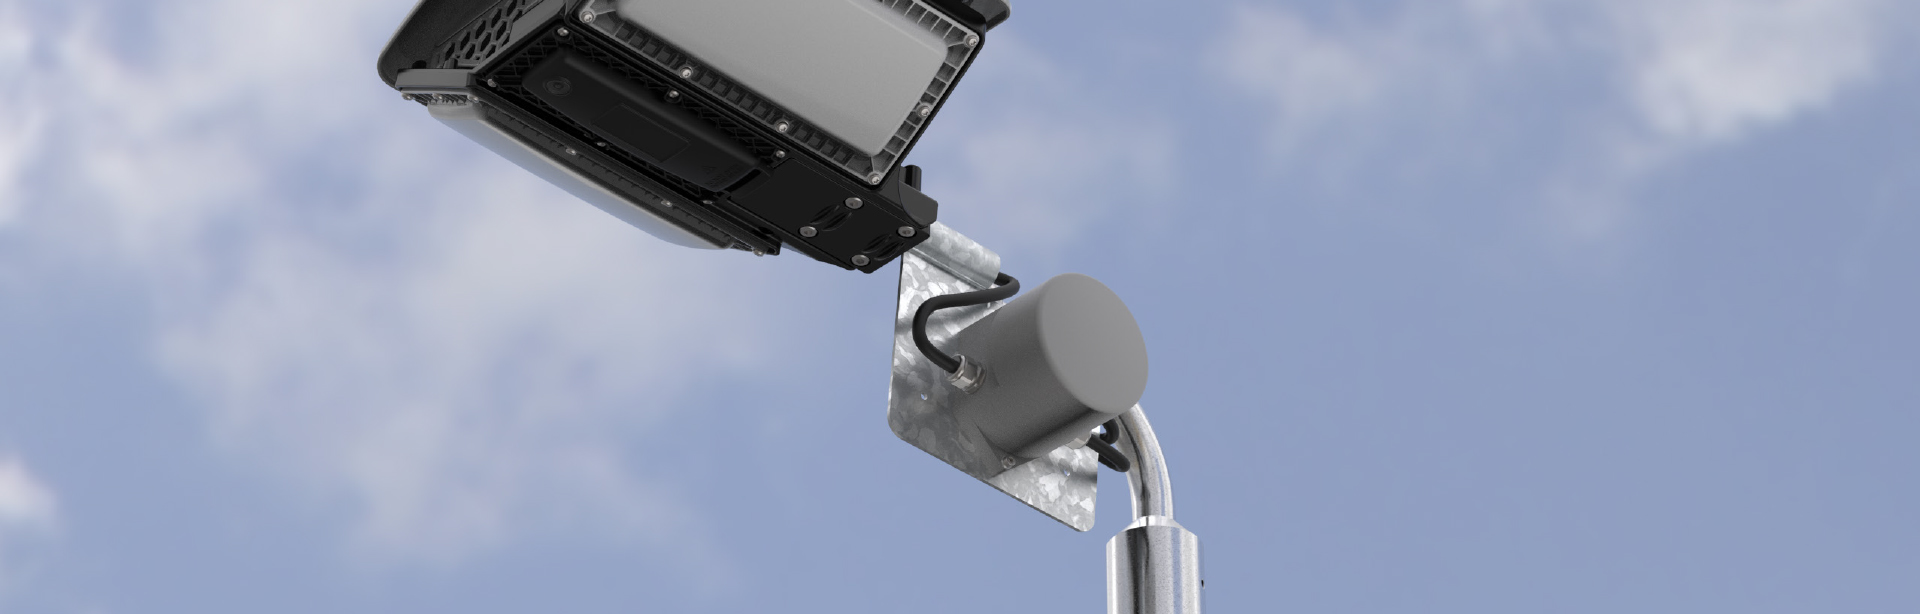 Allows for convenient mains in-out connection at the luminaire without modifying the luminaire.